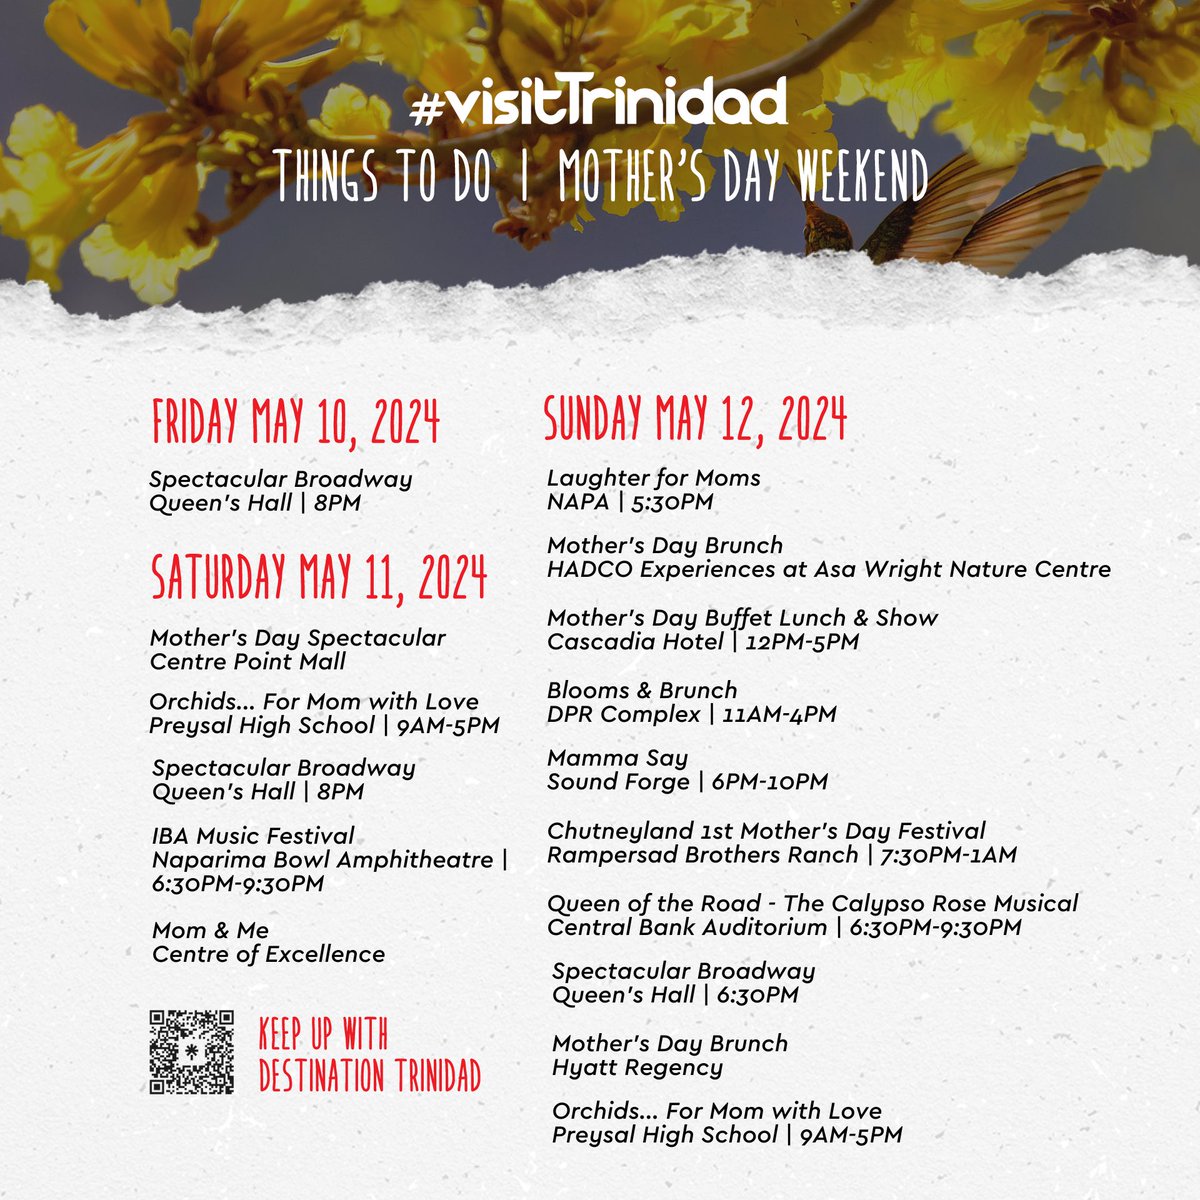 From concerts to brunches - celebrate Mother’s Day this weekend in Trinidad with one of our many experiences across the island. #visitTrinidad